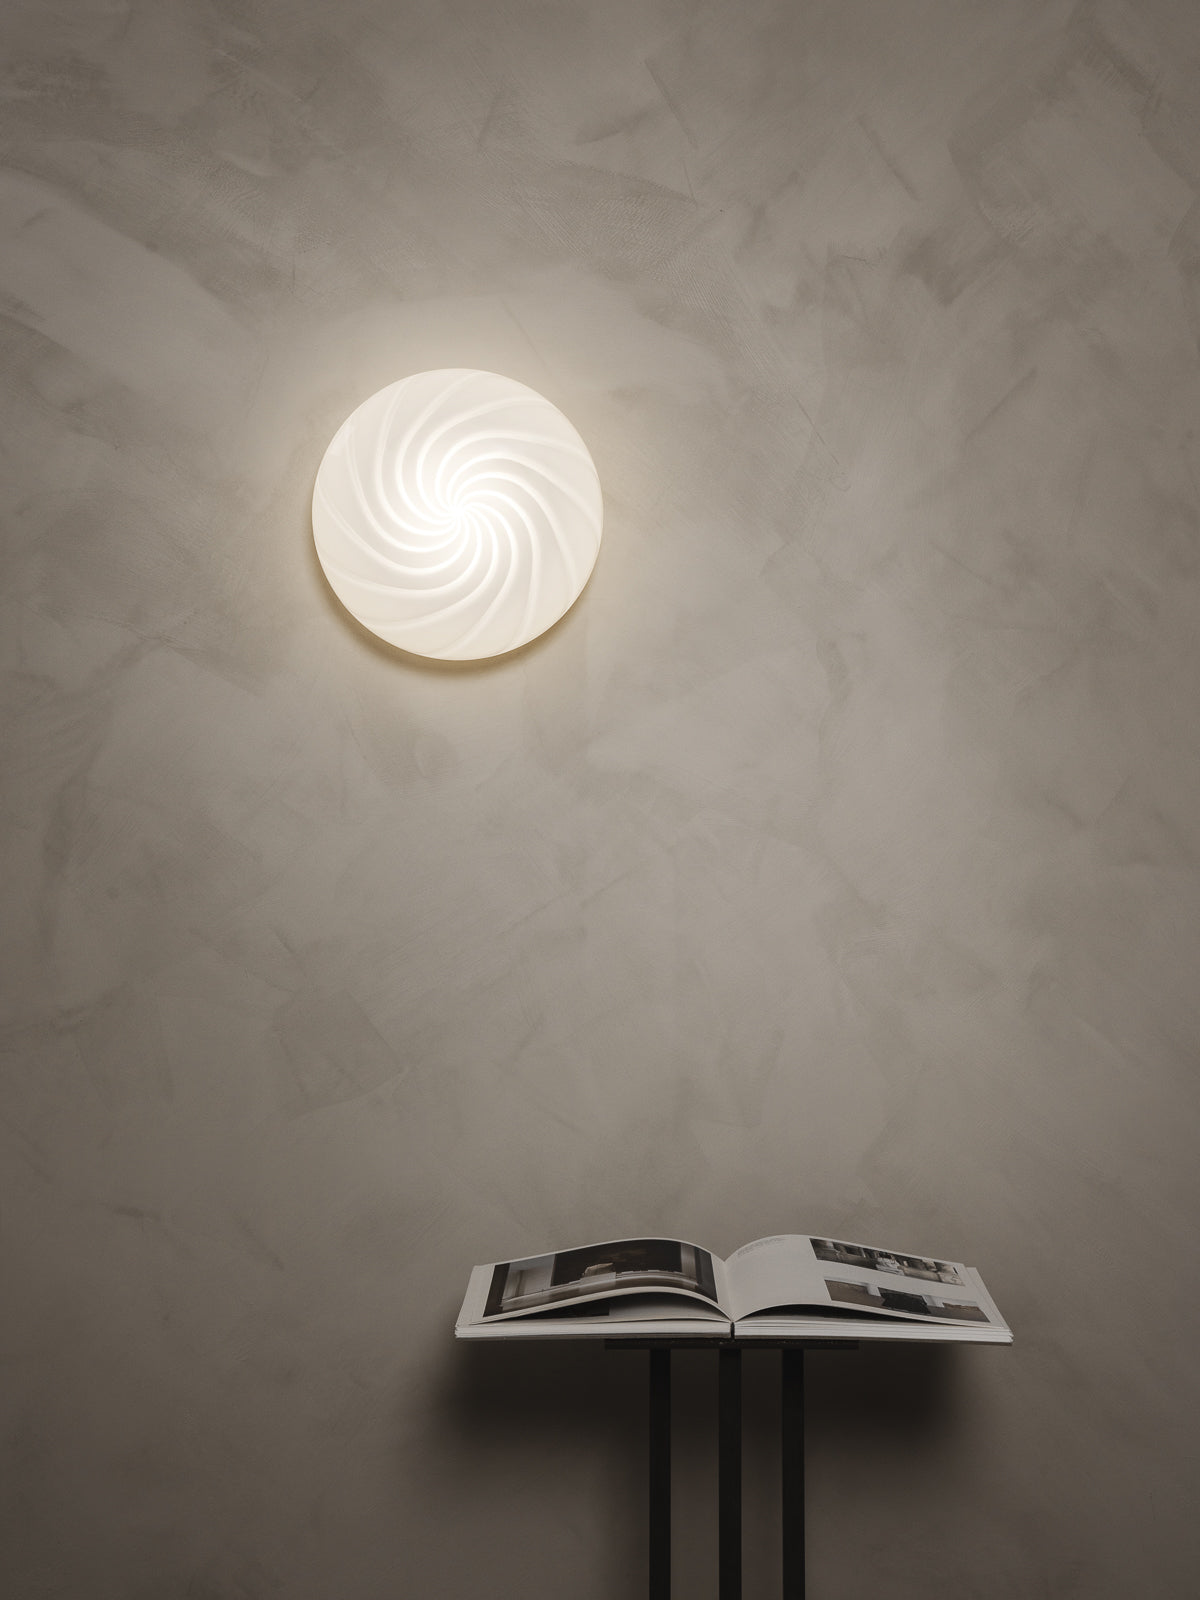 Defined by its curved mouth-blown opaline glass shade, this plafond lamp can be fixed on a wall or ceiling through a fitted hand-casted solid brass mount. The design features a swirl pattern obtained using an original 1970s mould, specifically picked to give the lamp a clean expression. Handmade in Murano, Italy. Murano lampe væglampe loftslampe loftlampe  Copenhagen Venice 